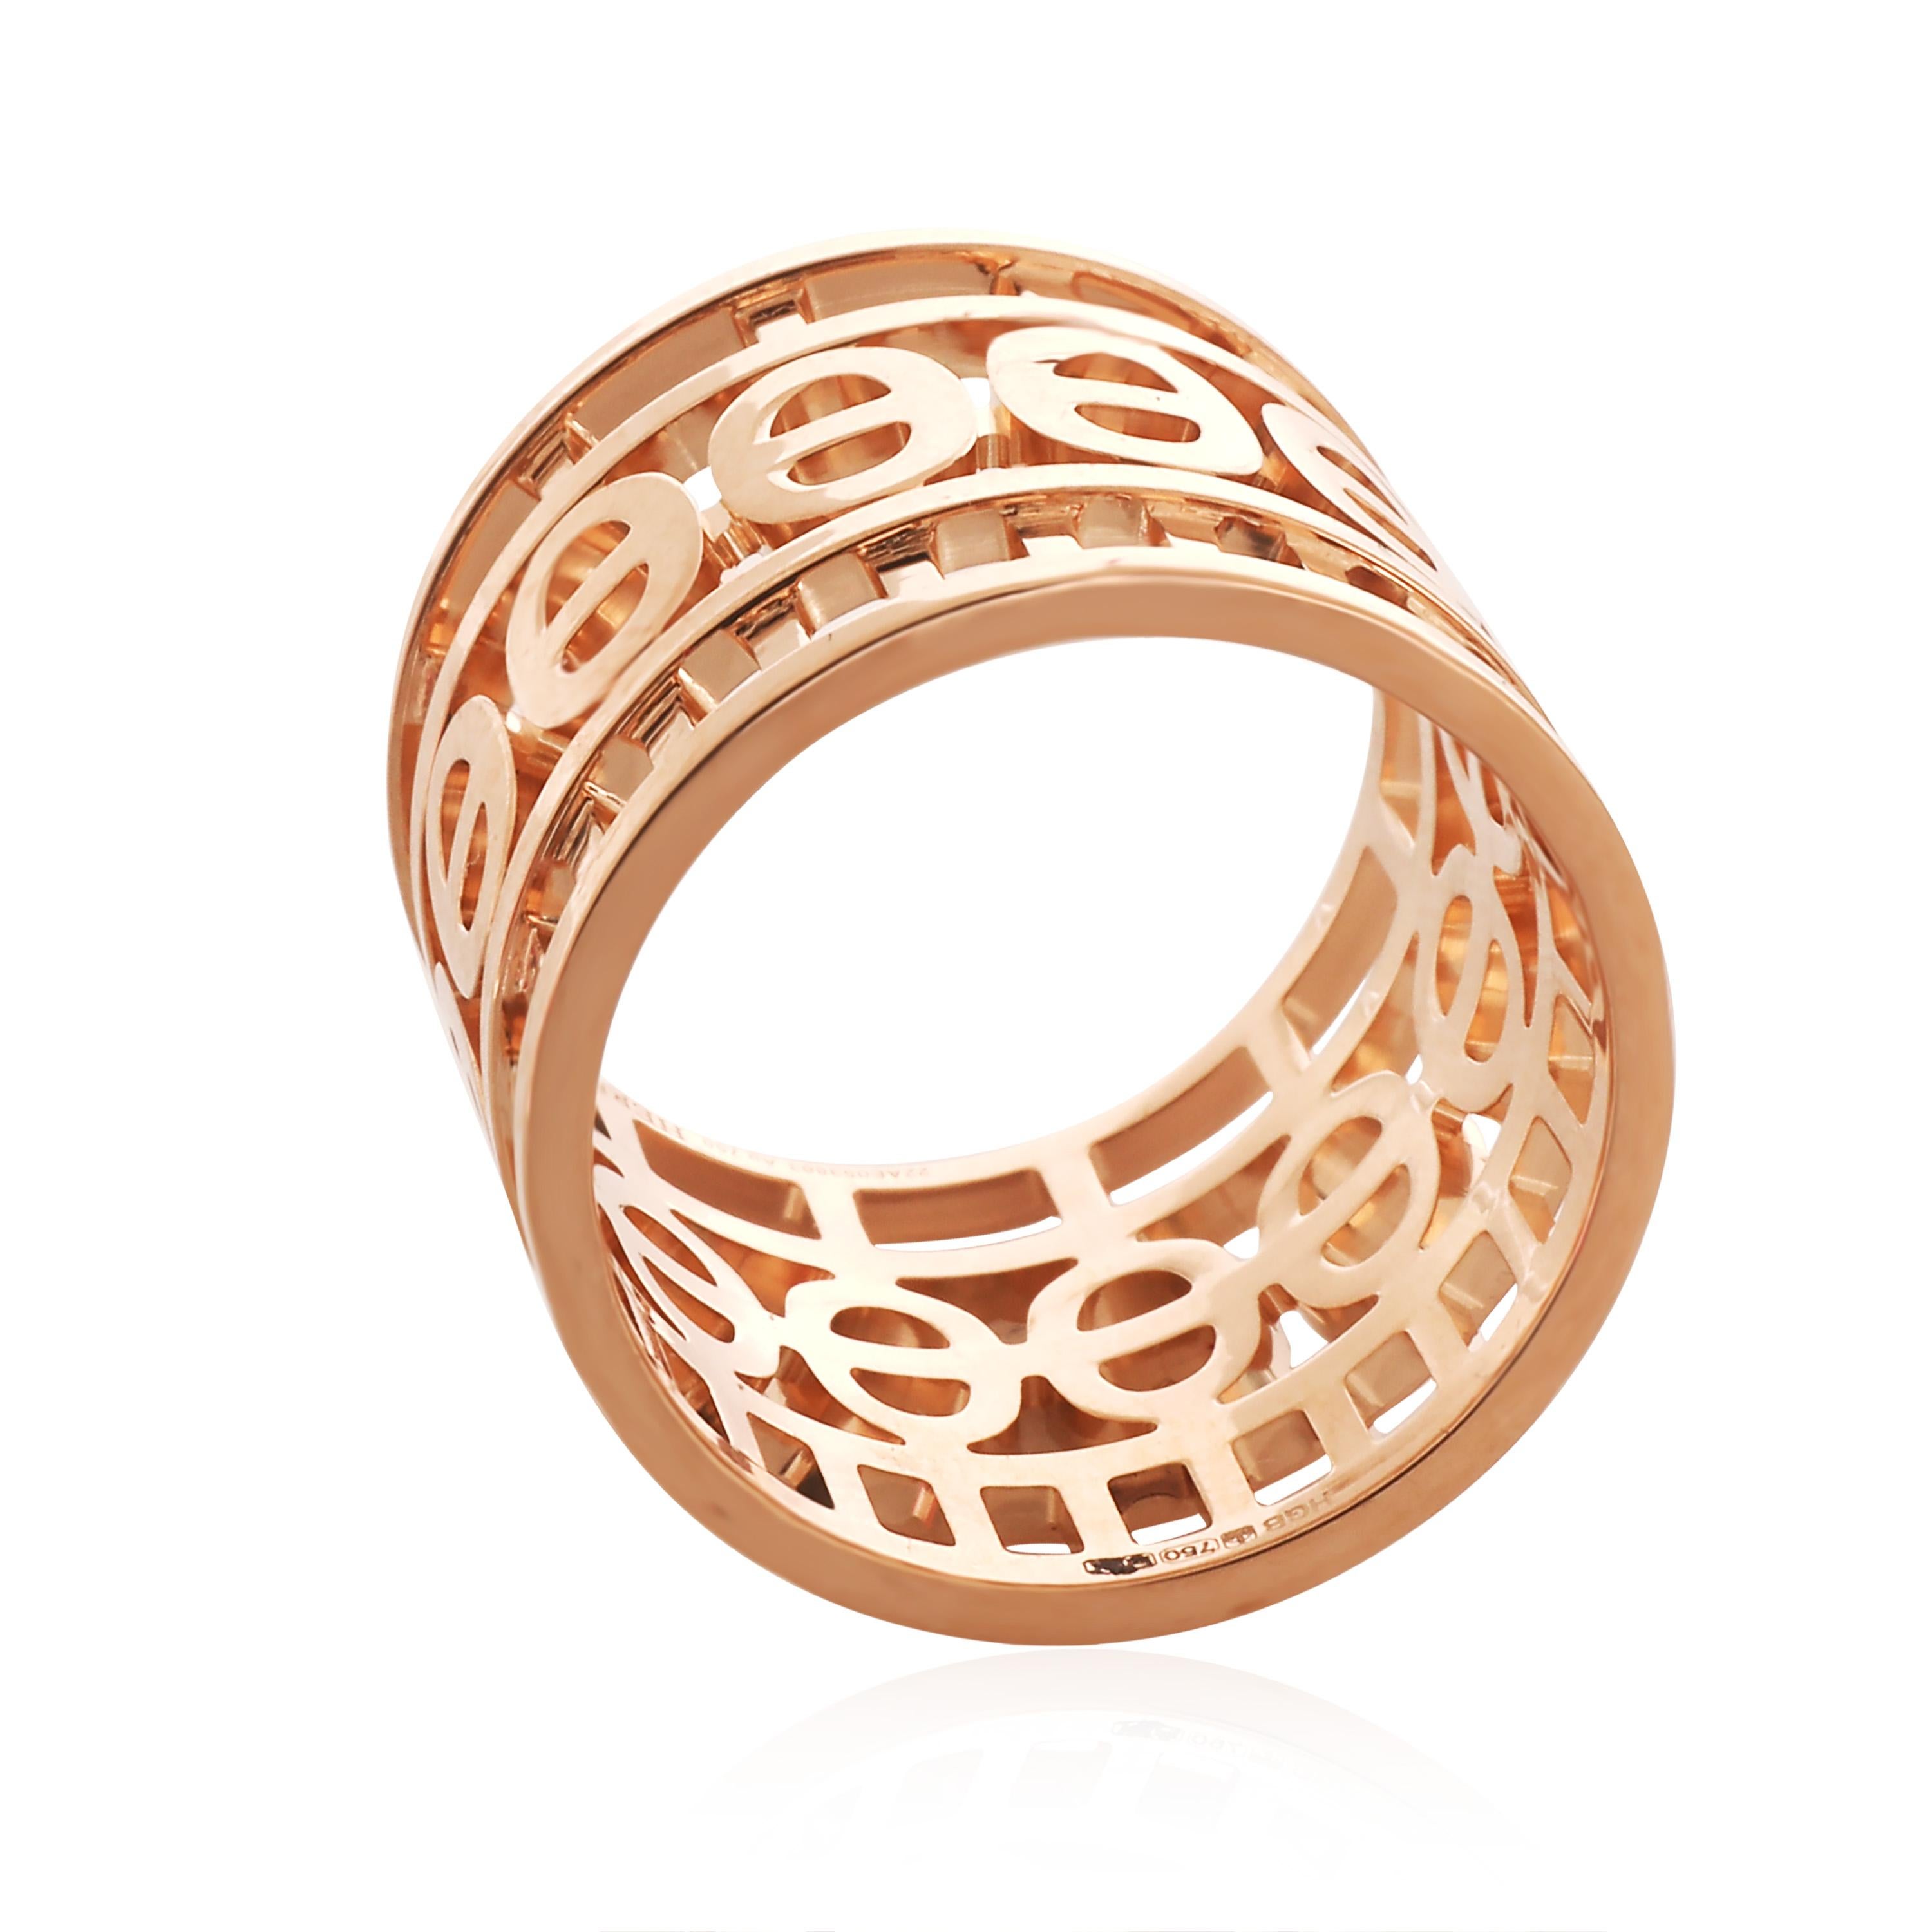 Hermès Chaine D'Ancre Ring in 18K Rose Gold

PRIMARY DETAILS
SKU: 134936
Listing Title: Hermès Chaine D'Ancre Ring in 18K Rose Gold
Condition Description: Retails for 5850 USD. In excellent condition and recently polished. Ring size is 6.25. Comes